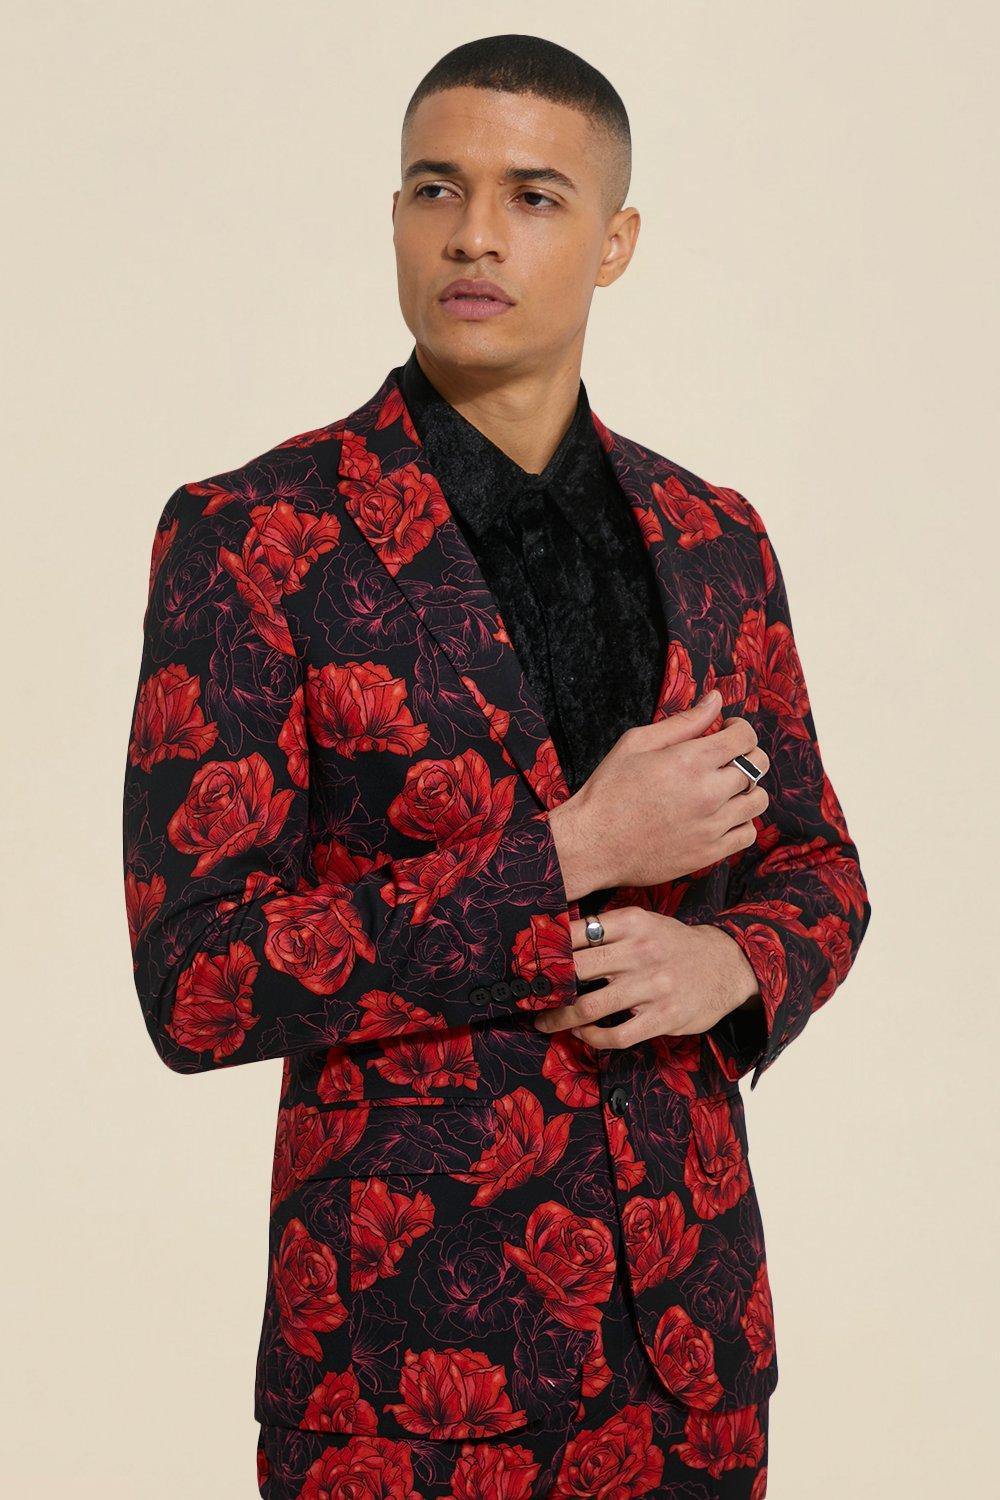 boohooMAN Relaxed Fit Spliced Floral Print Suit Jacket - Black - Size 38